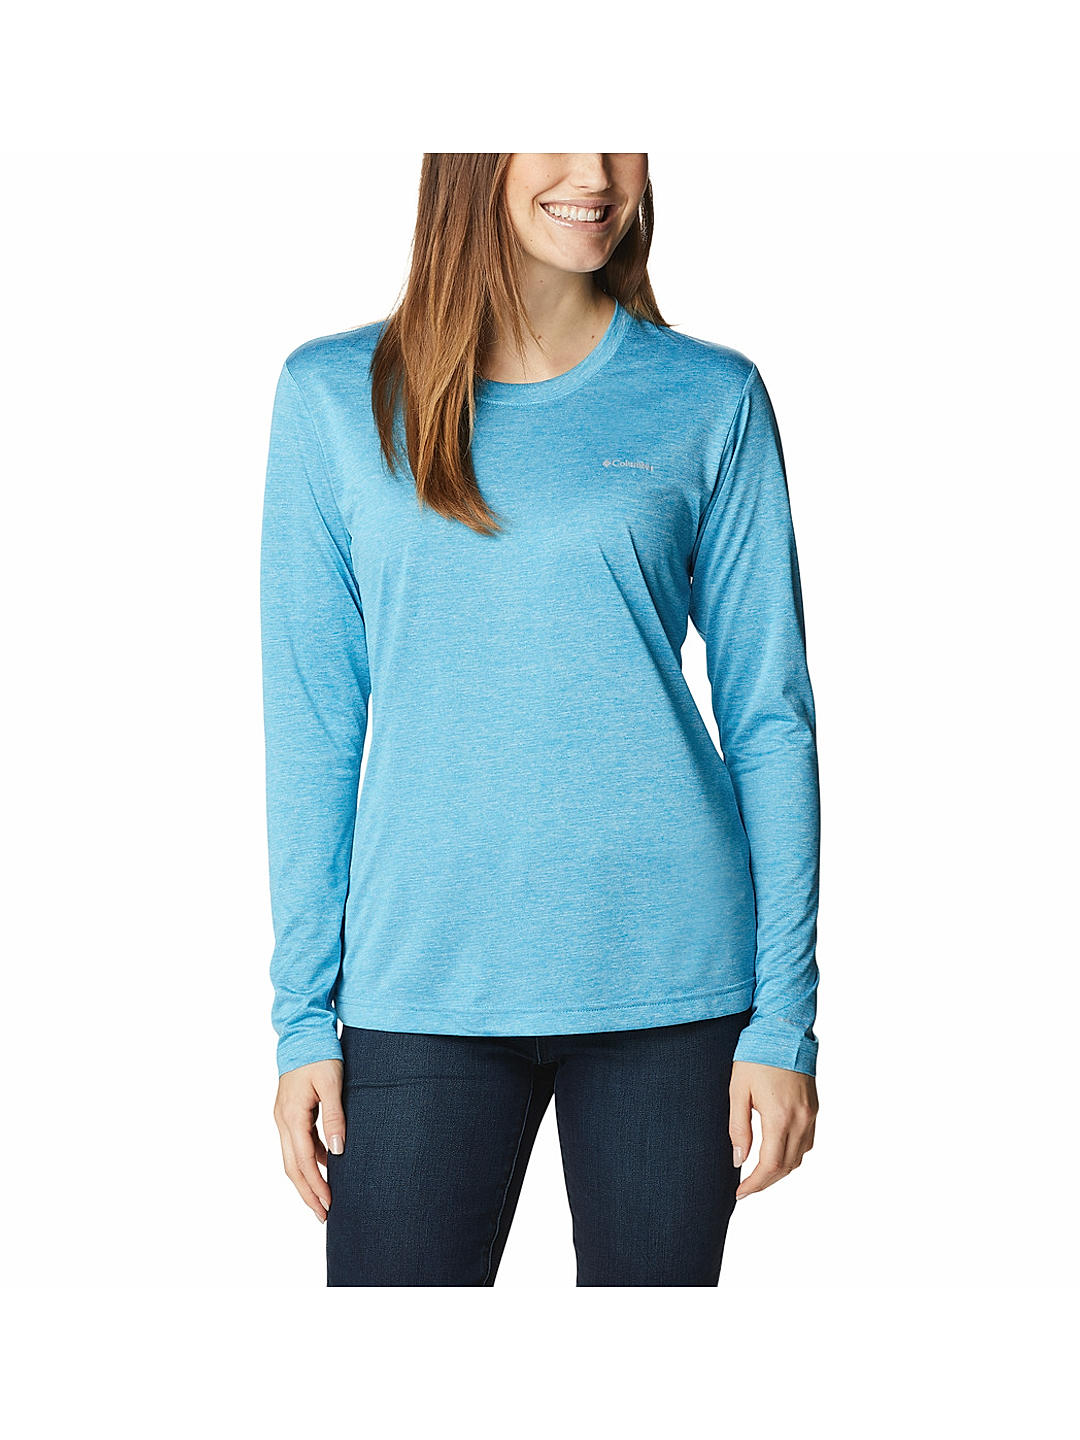 Buy Blue Columbia Hike Ls Shirt for Women Online at Columbia Sportswear